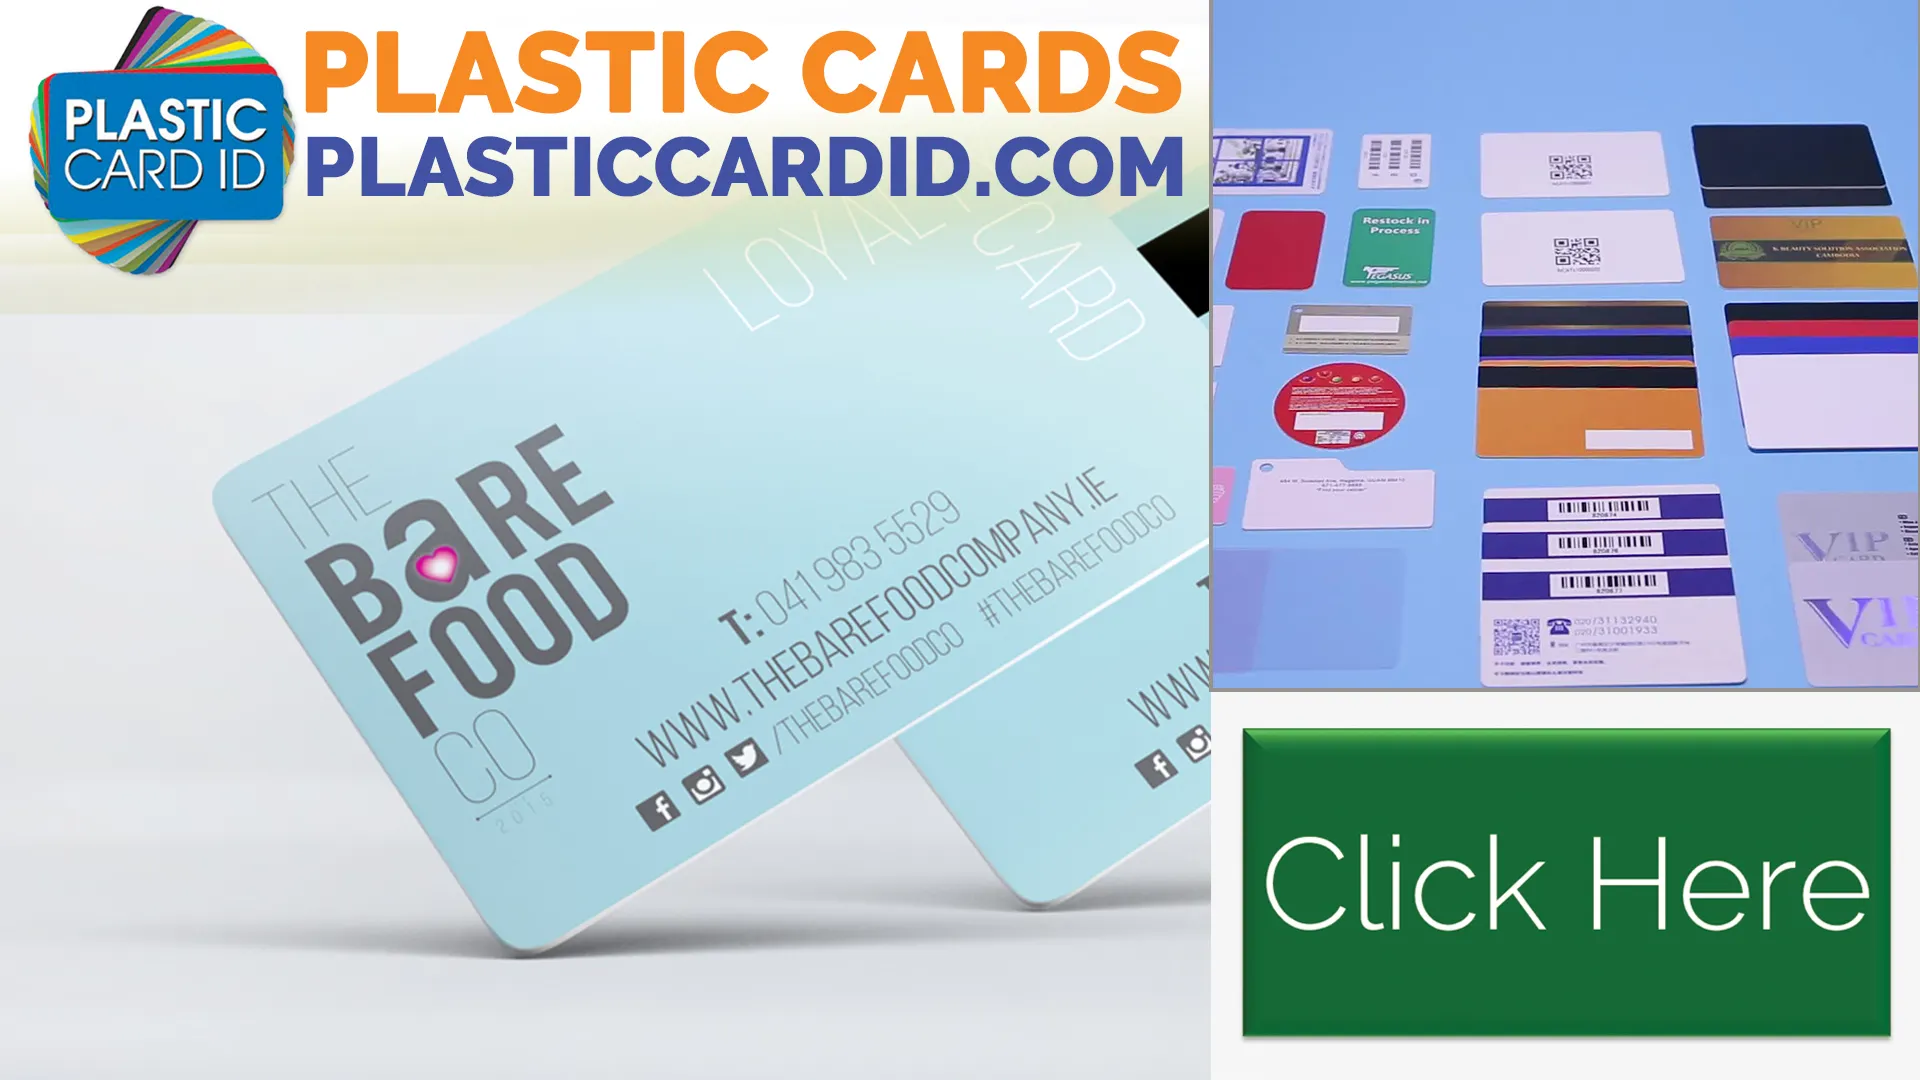 Our Range of Plastic Cards